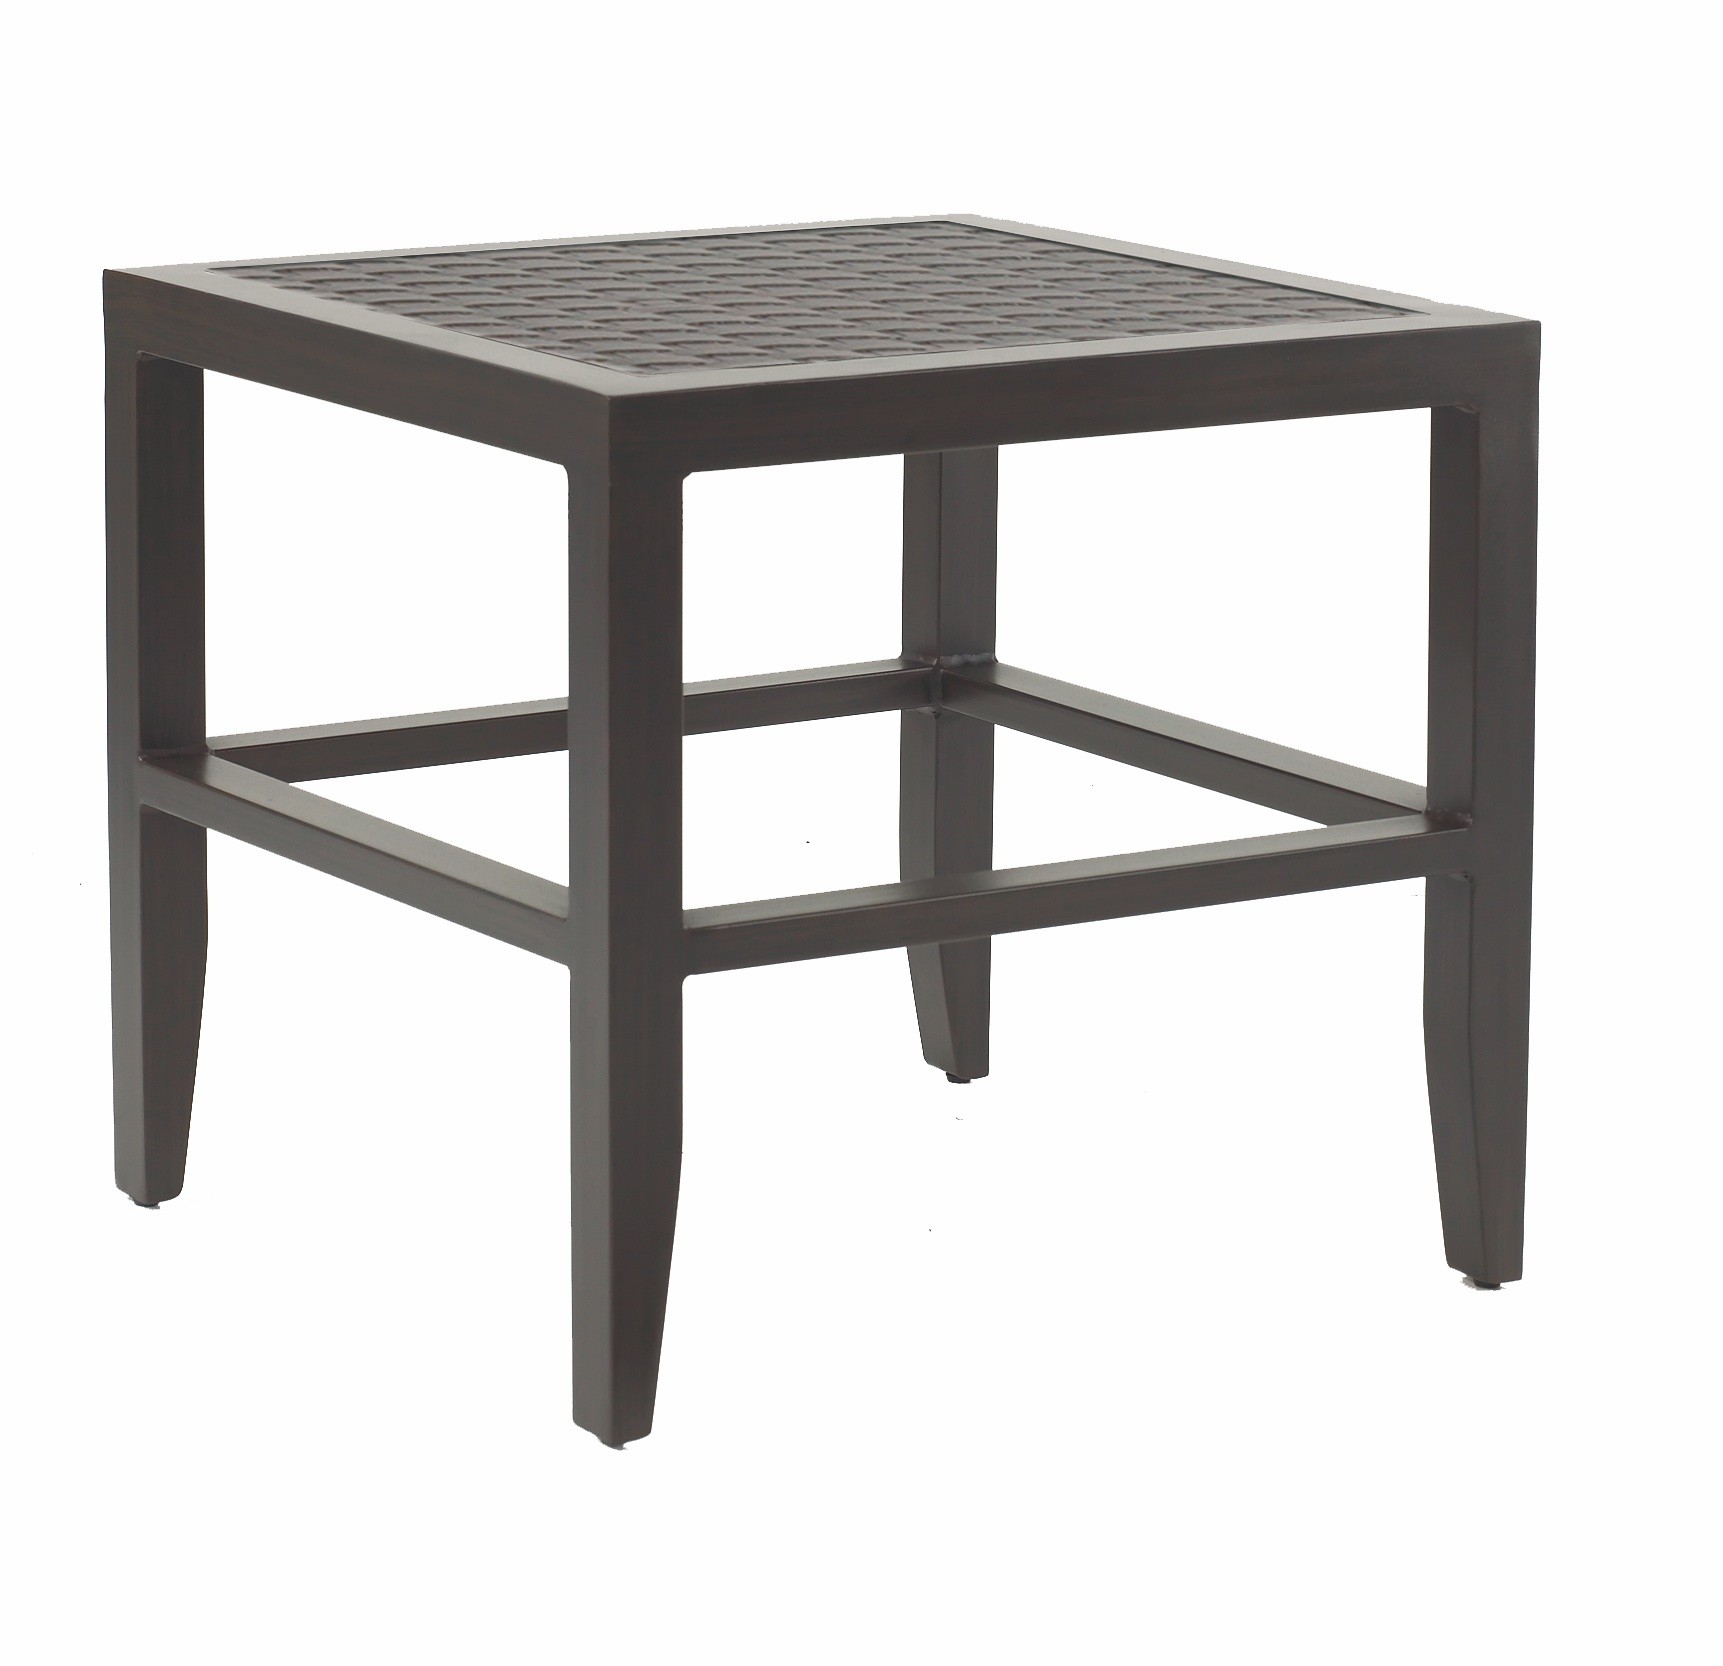 CLASSICAL SQ END TABLE
SSS20
SPEC SHEET
